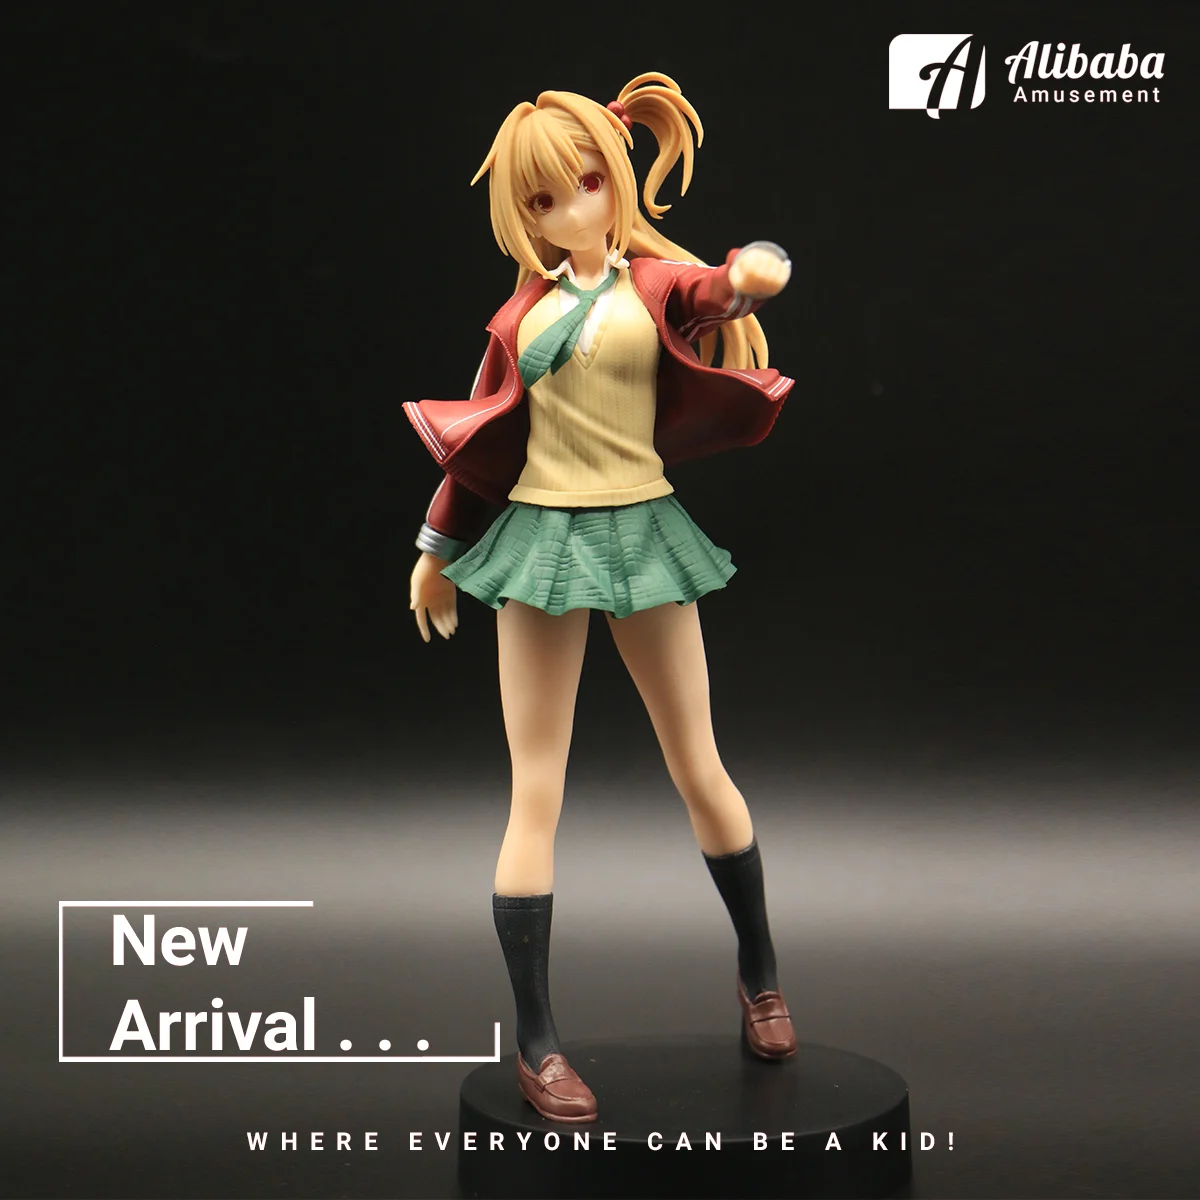 Battle in 5 Seconds After Meeting – Yuri Amagake Figure